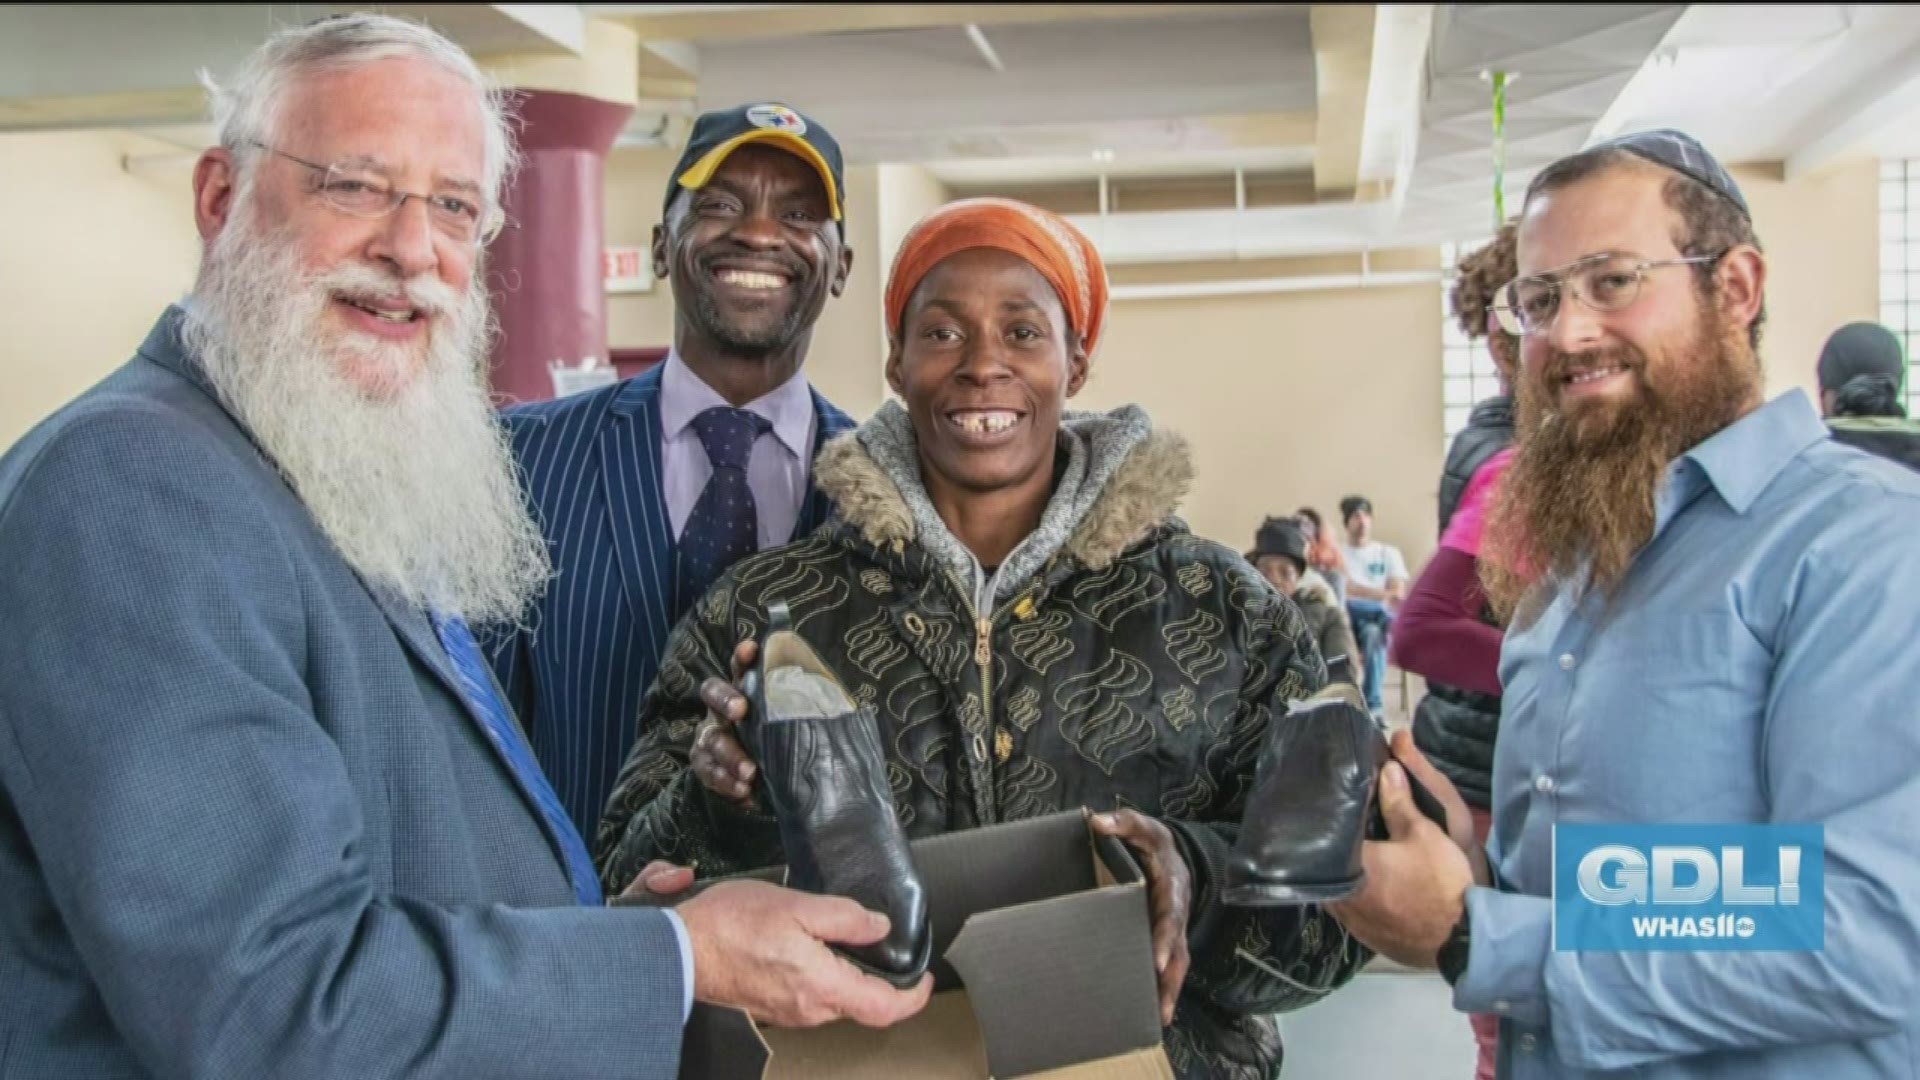 You can help Chabad of Kentucky in their mission to provide shoes and clothing to those in need by donating online at ChabadKY.com/Project Friendship.